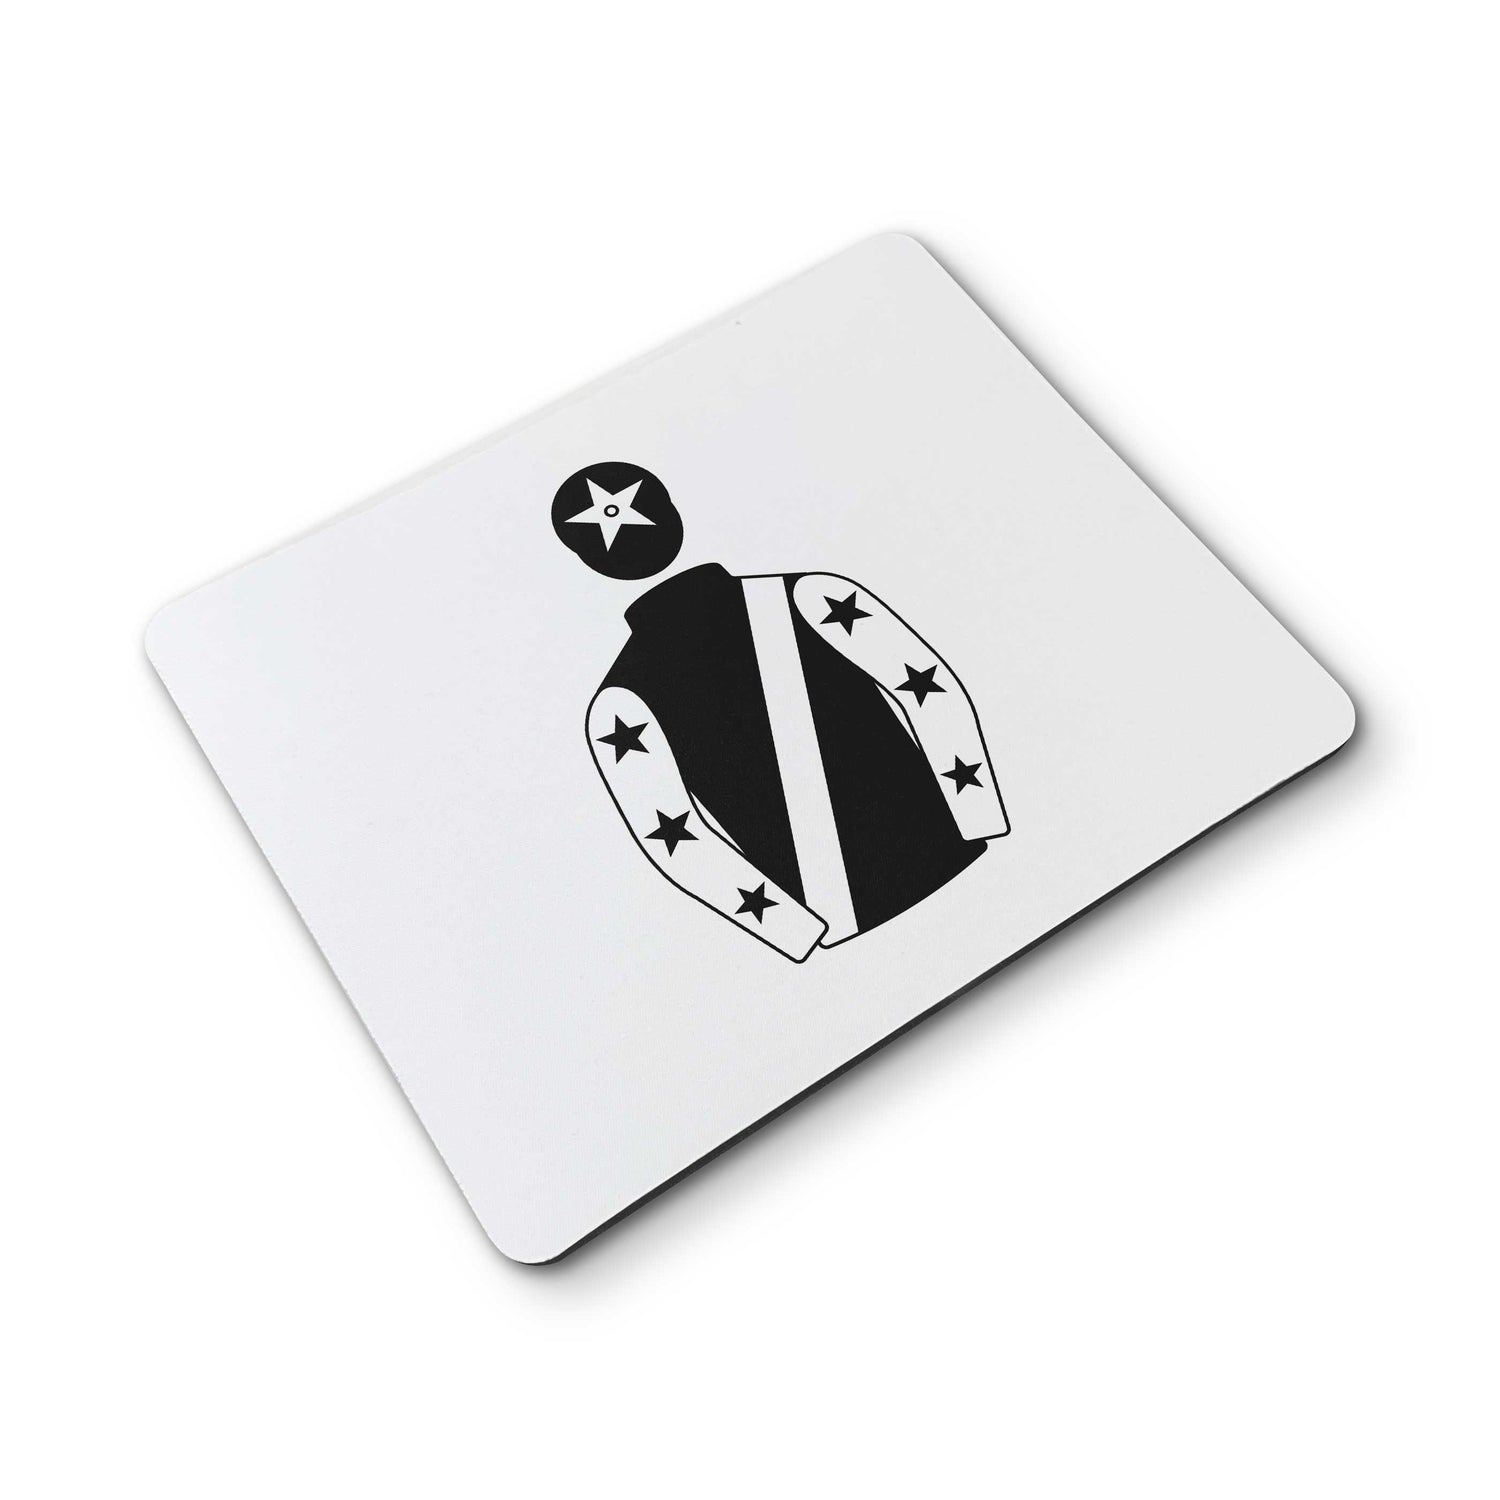 KTDA Racing Mouse Mat - Mouse Mat - Hacked Up